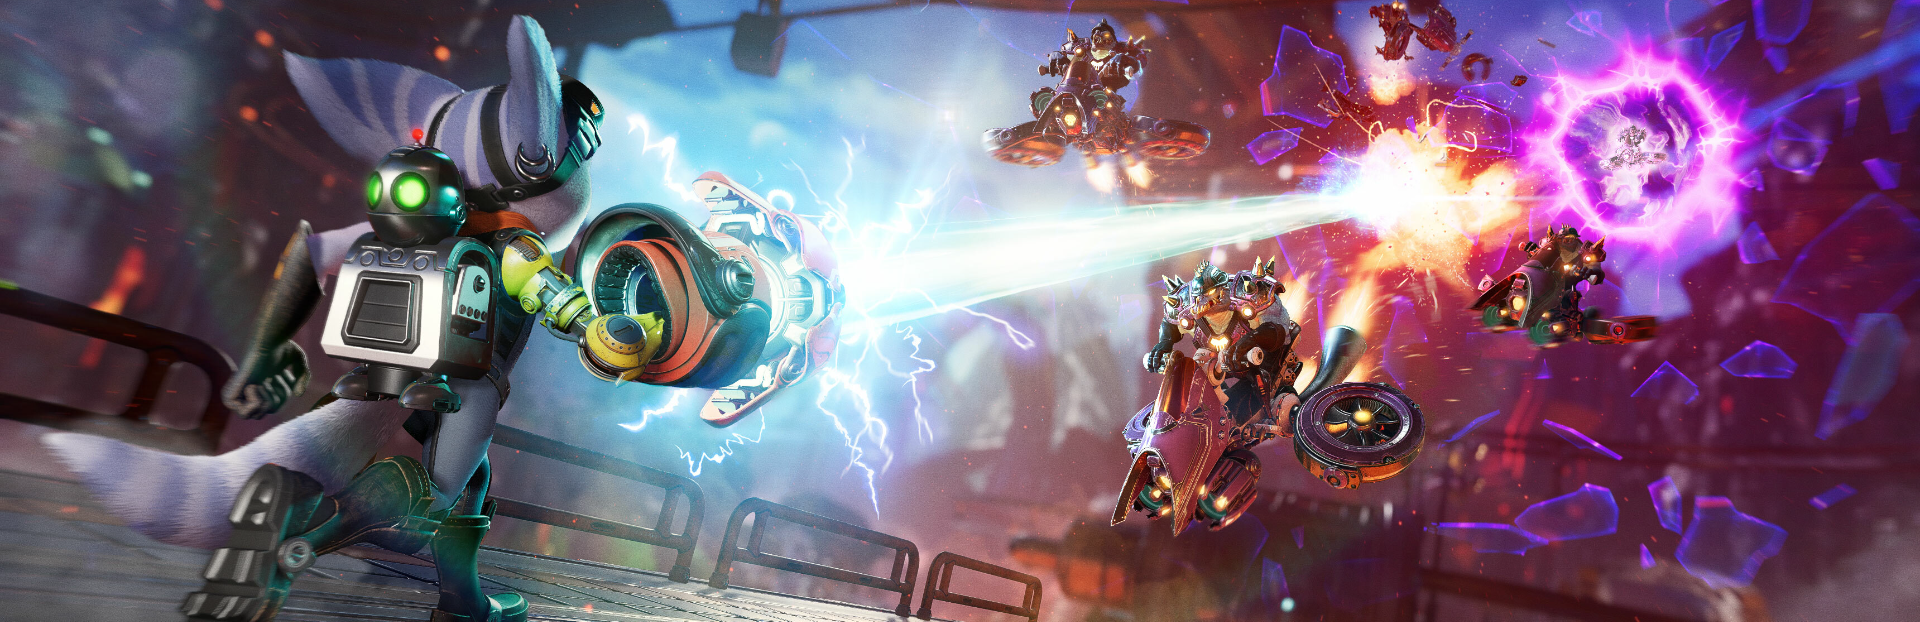 Ratchet & Clank: Rift Apart Update 1.922 for Sep. 25 Includes Improvements